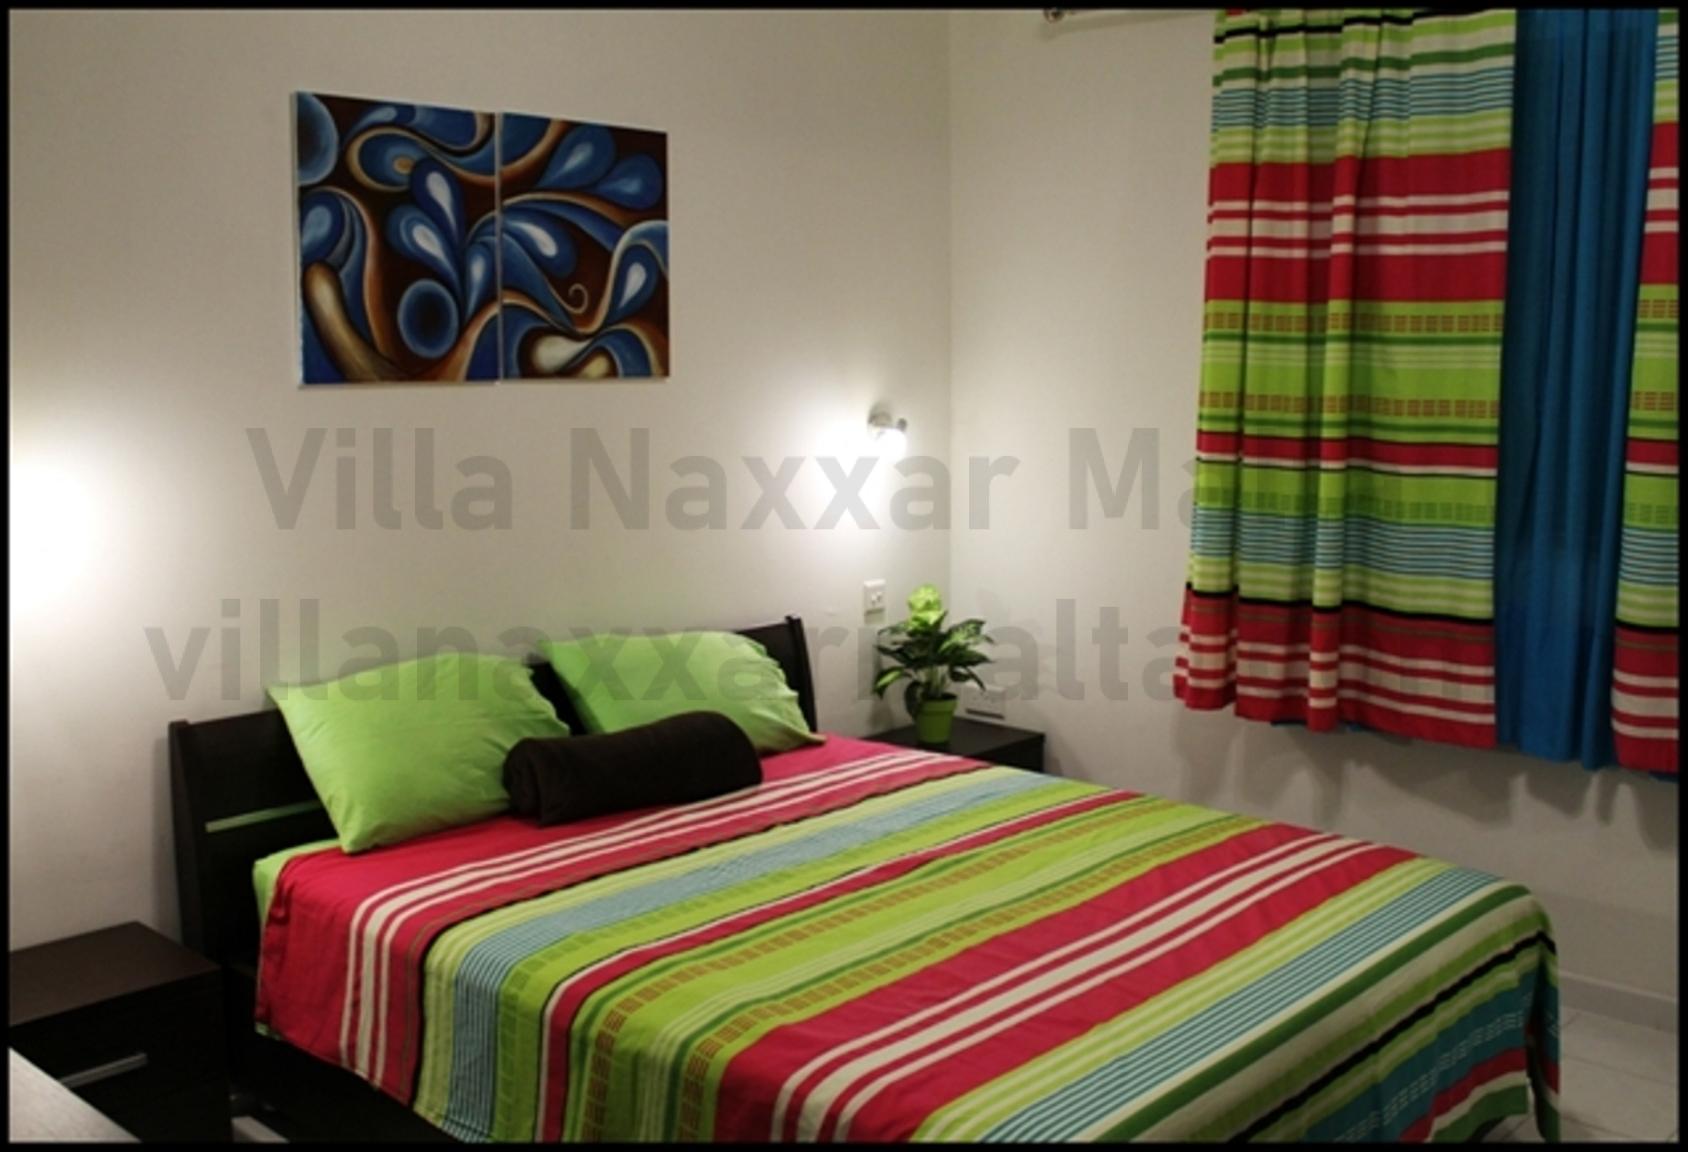 Villa Naxxar Malta – Second Bedroom (double Bed) with large wardrobes, AC, WIFI and more ... space for additional beds